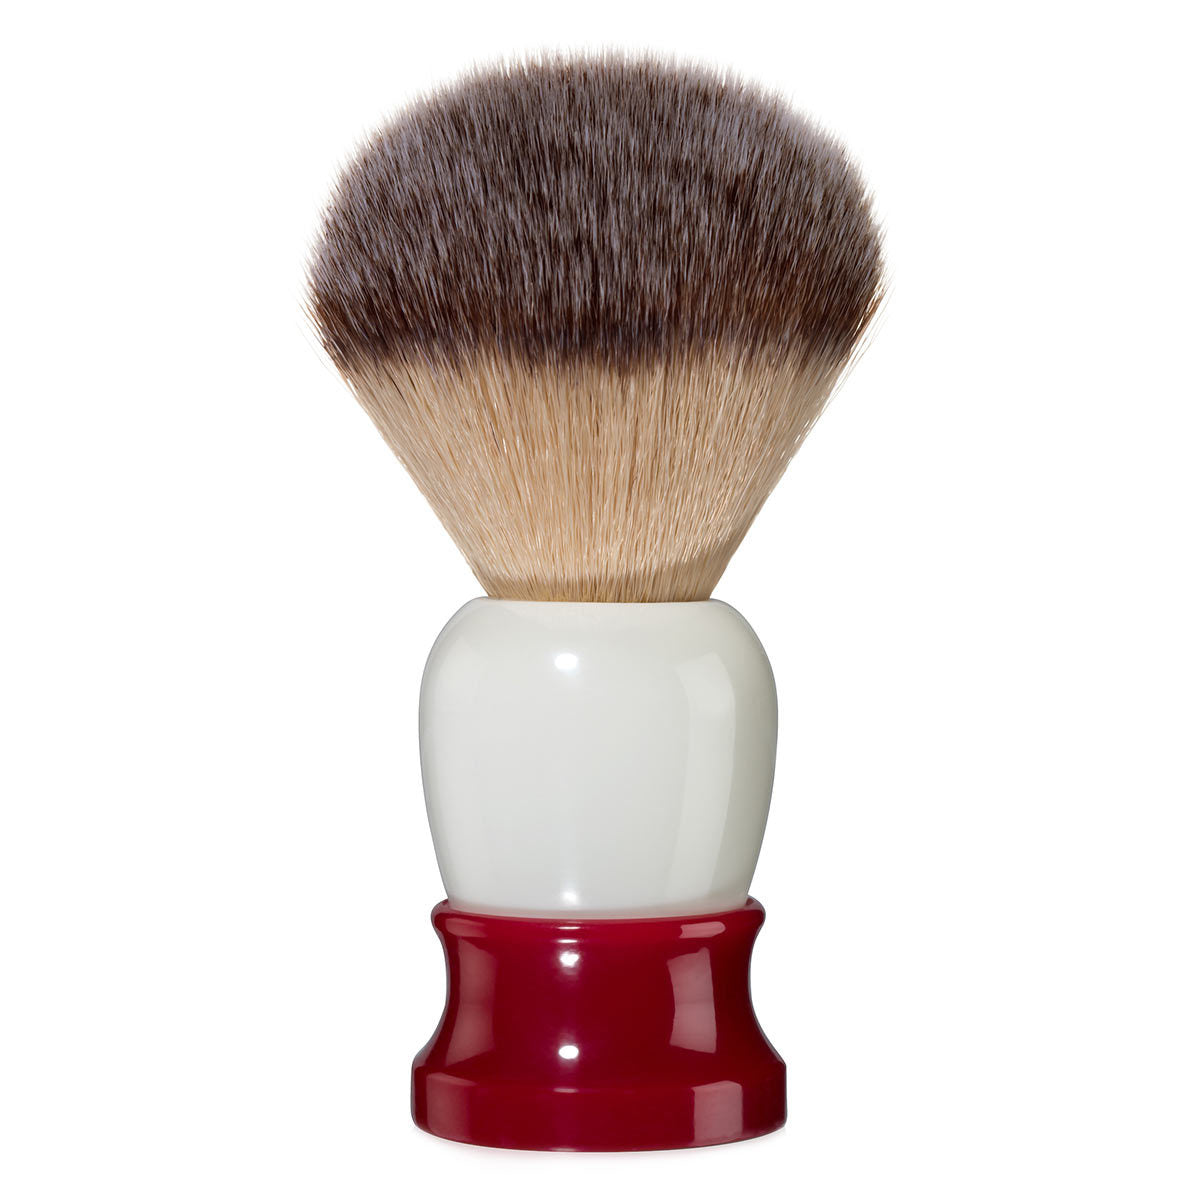 Primary image of Fine Accoutrements Classic Angel Hair Shave Brush - Red + White 20mm Null